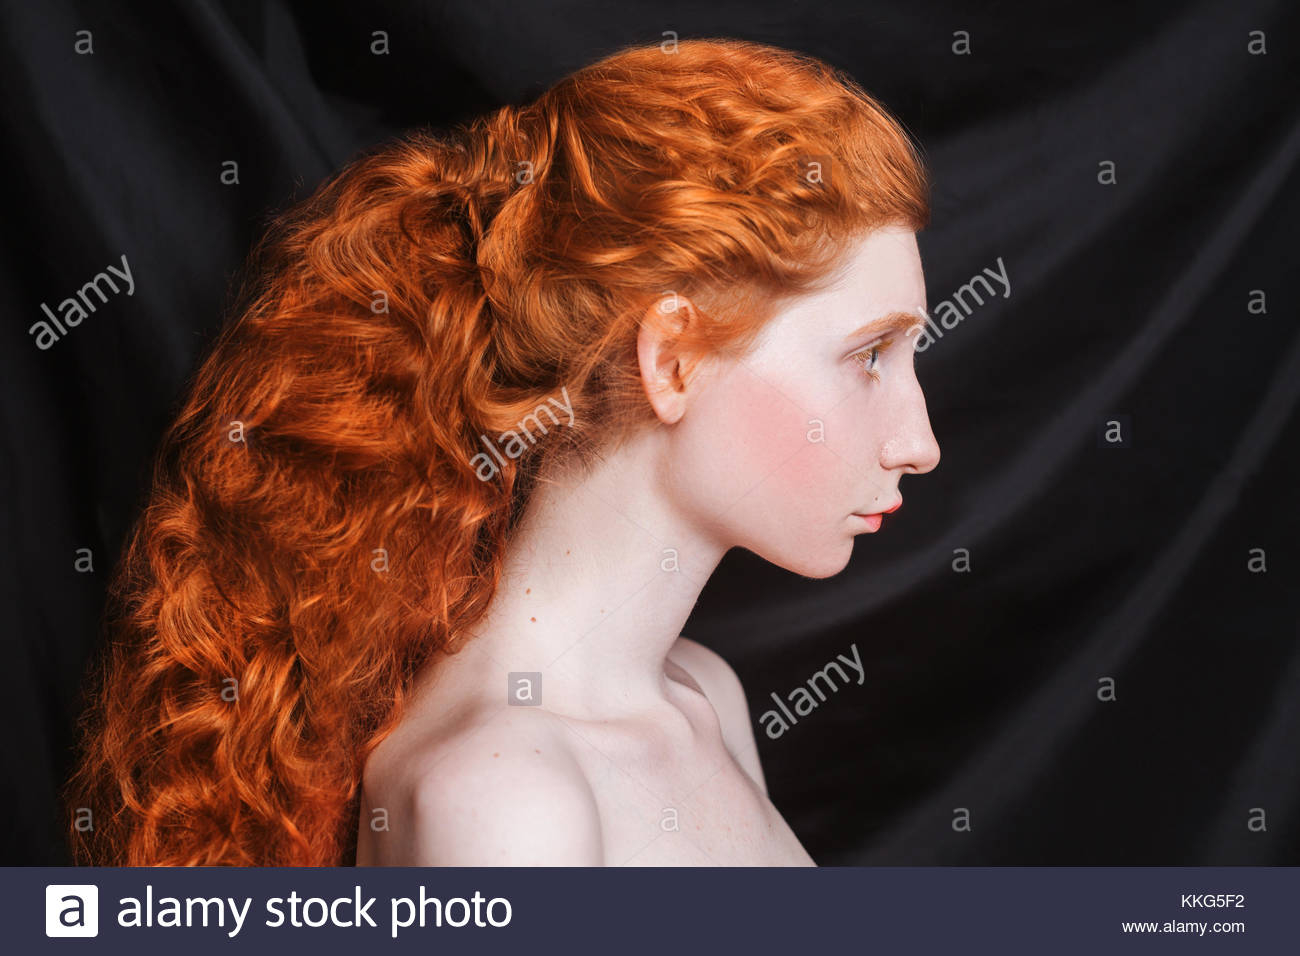 Makeup For Blue Eyes Red Hair Woman With Long Curly Red Hair Gathered In Ponytail On Black Stock